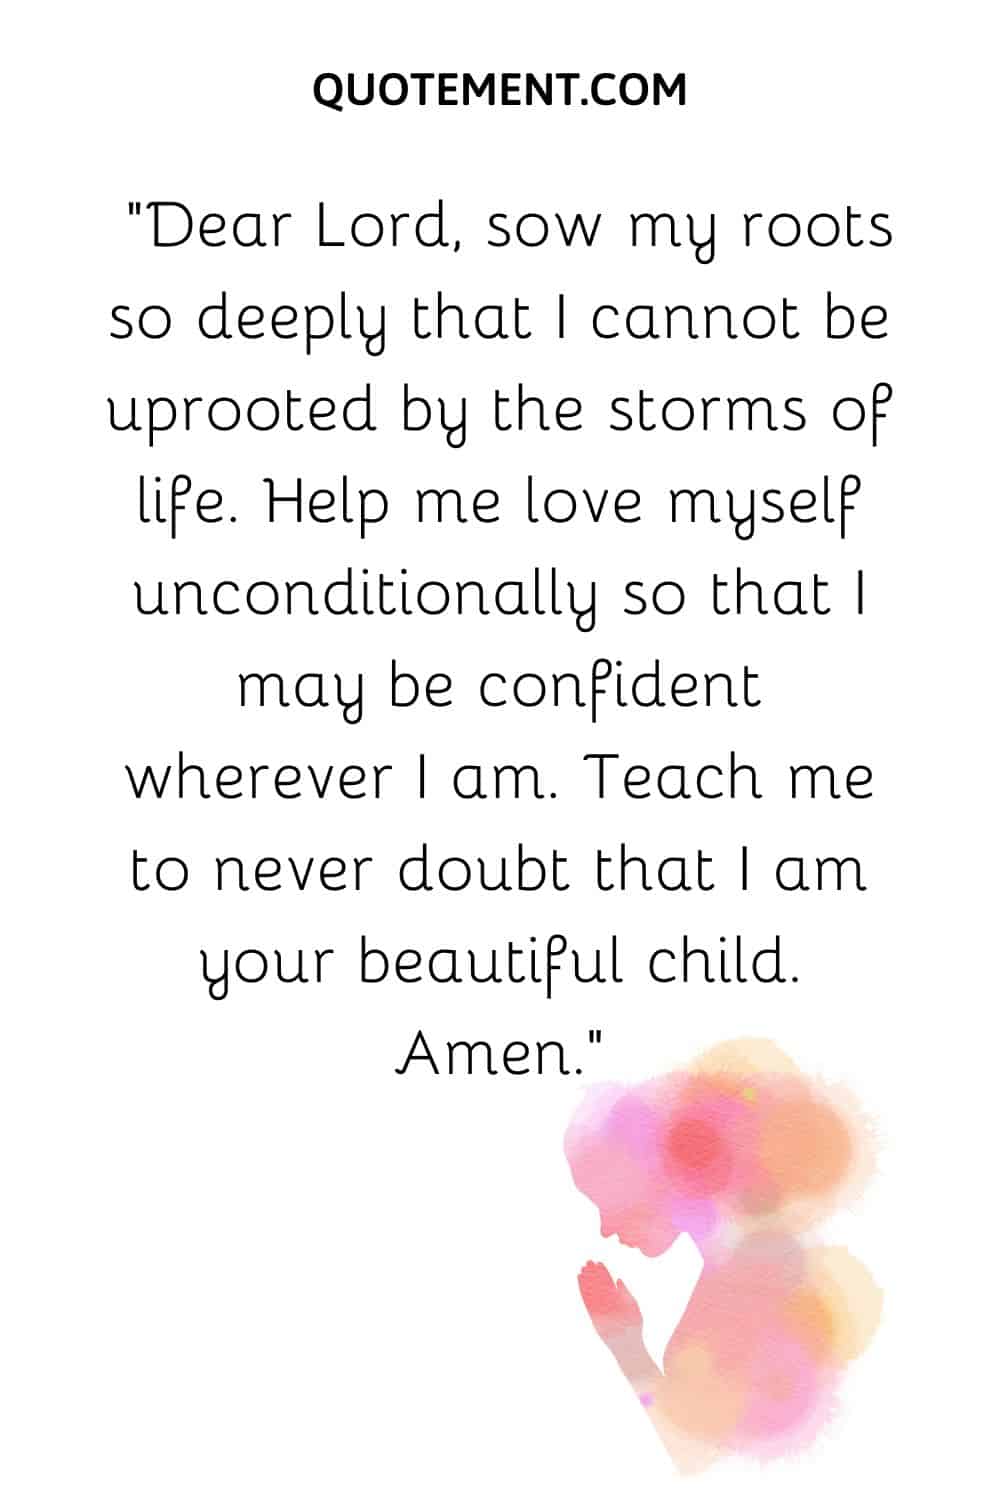 Dear Lord, sow my roots so deeply that I cannot be uprooted by the storms of life